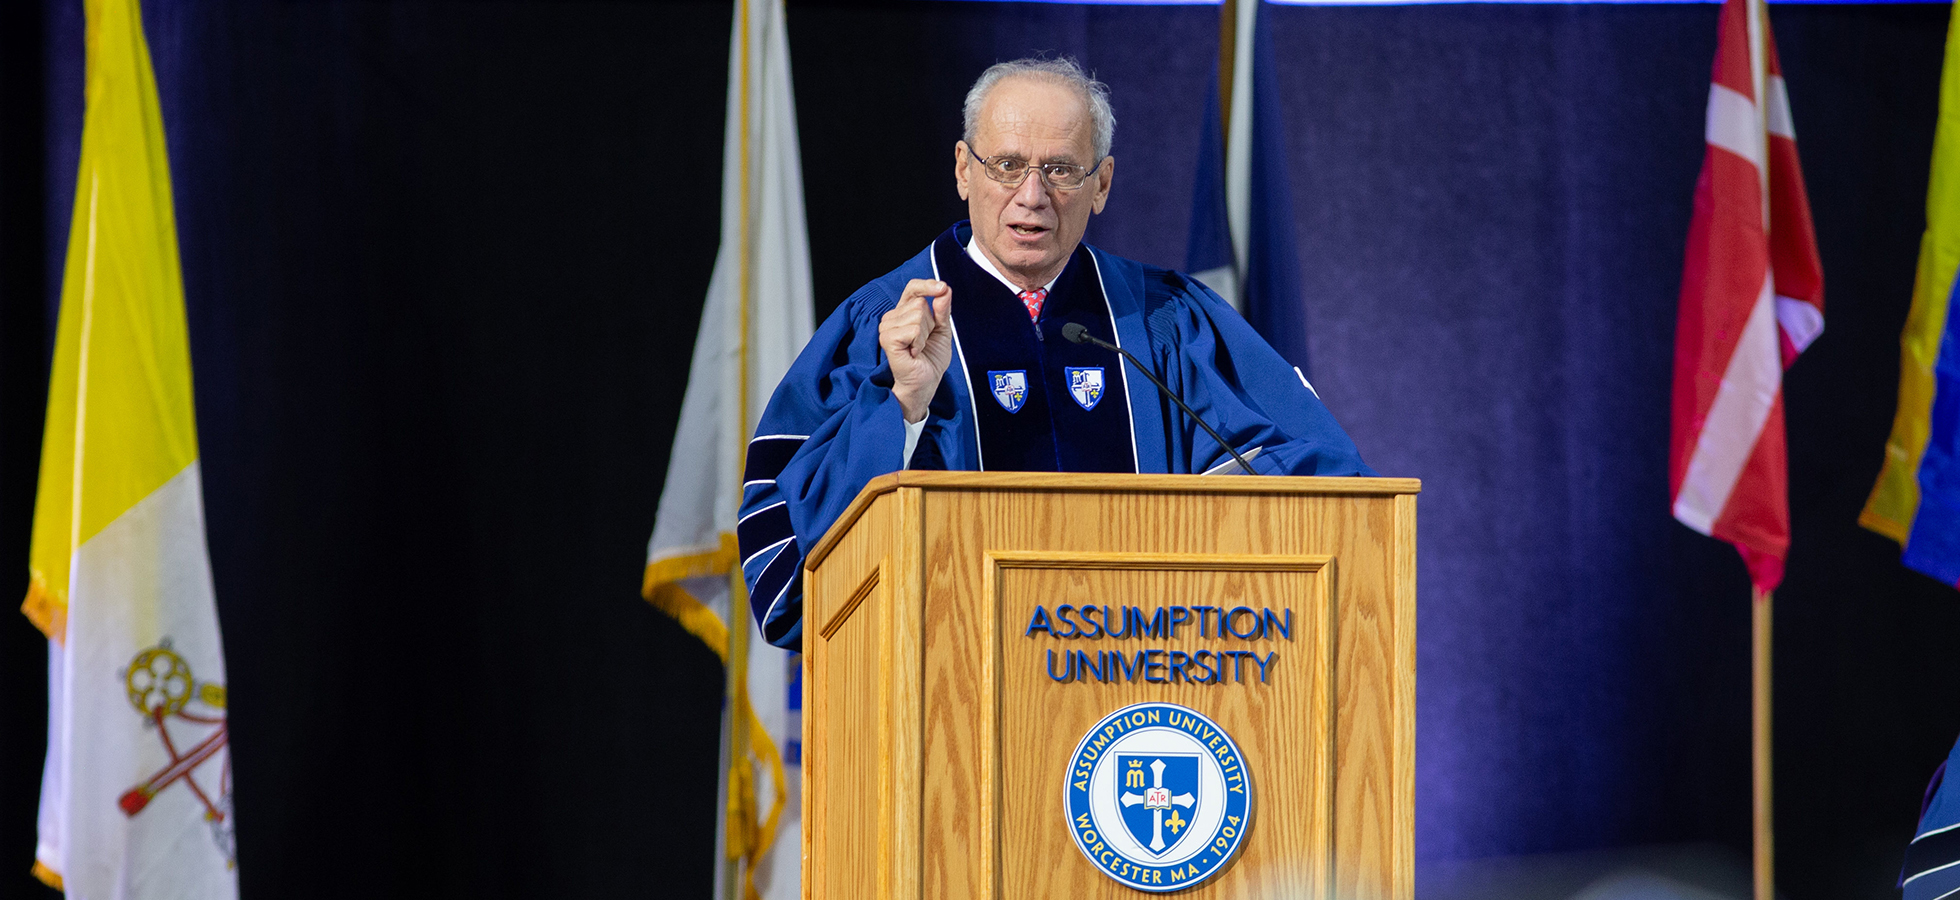 Worcester Red Sox's Larry Lucchino Implores Graduates to have Fun, be Bold and Don’t be Afraid to Say ‘I Don’t Know’